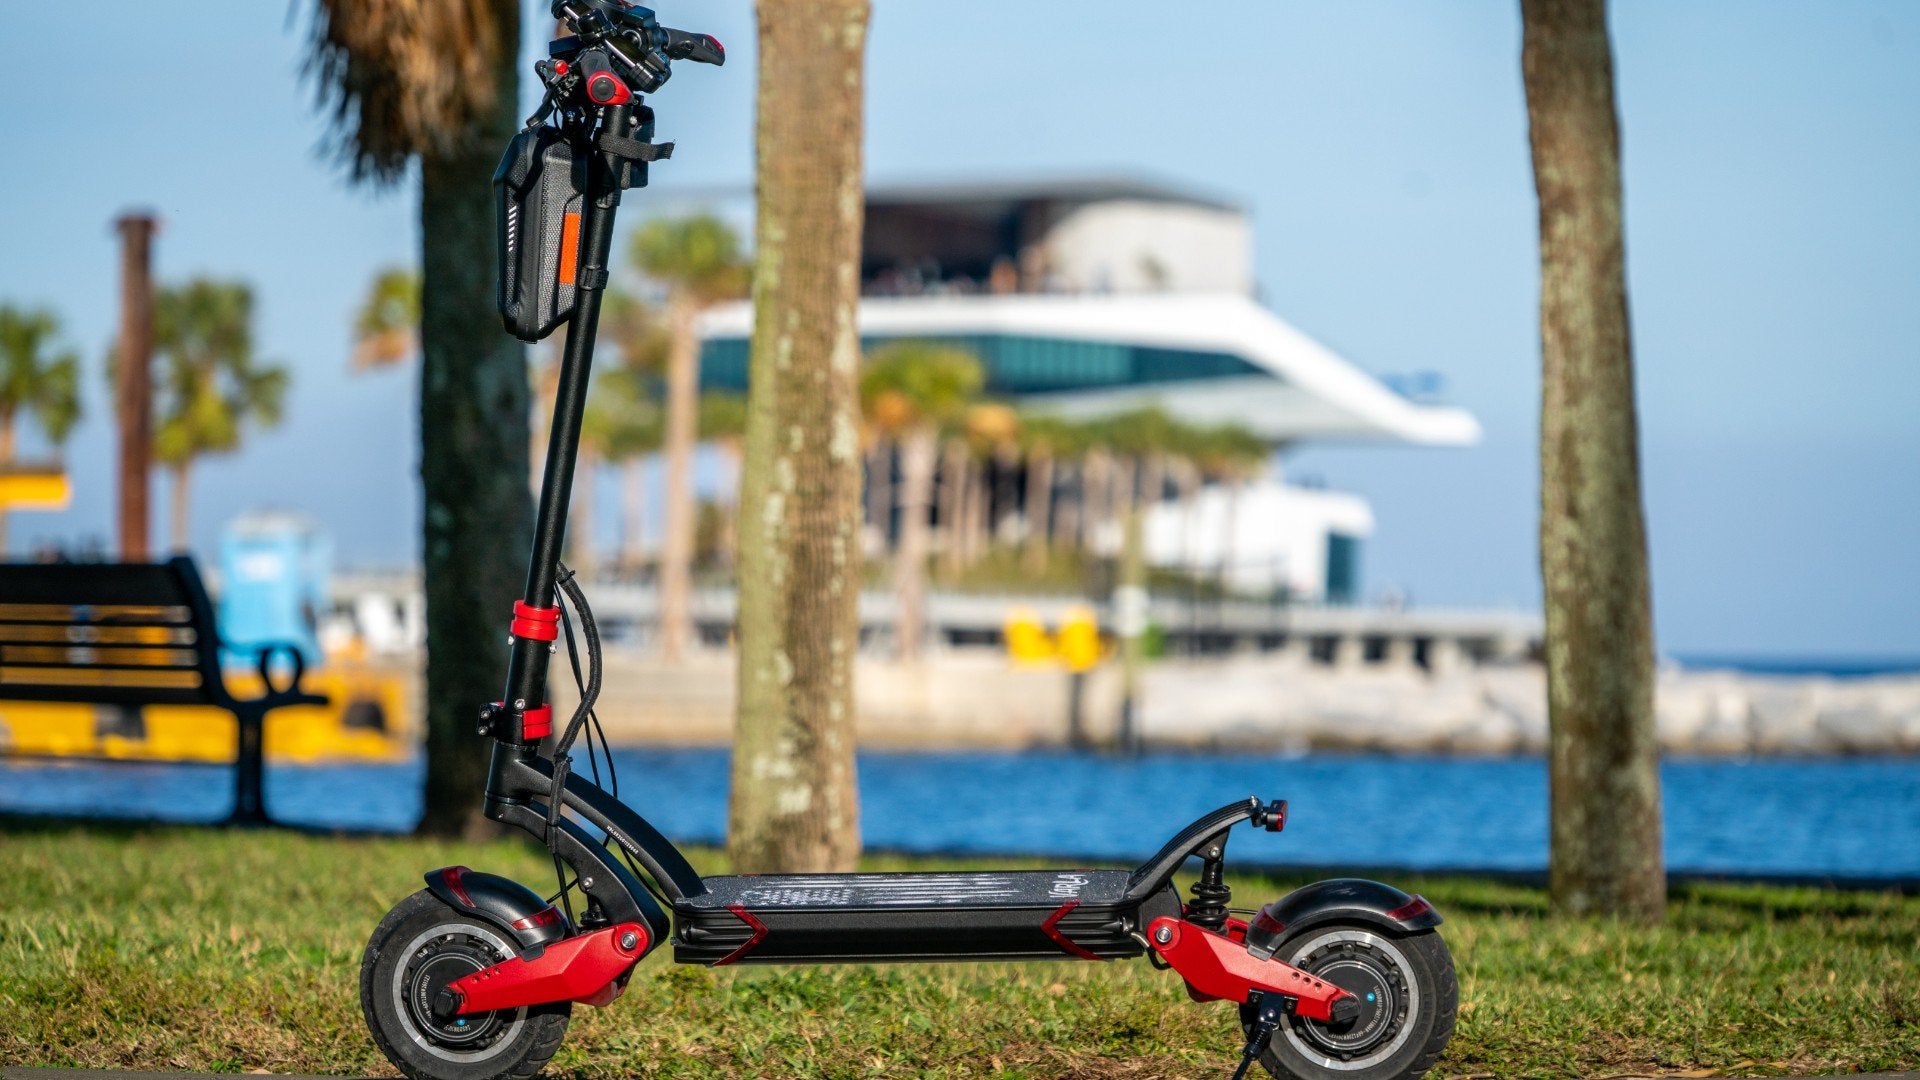 The Future of E-Scooters: Region-based Usage and Potential as a Mode of Transportation